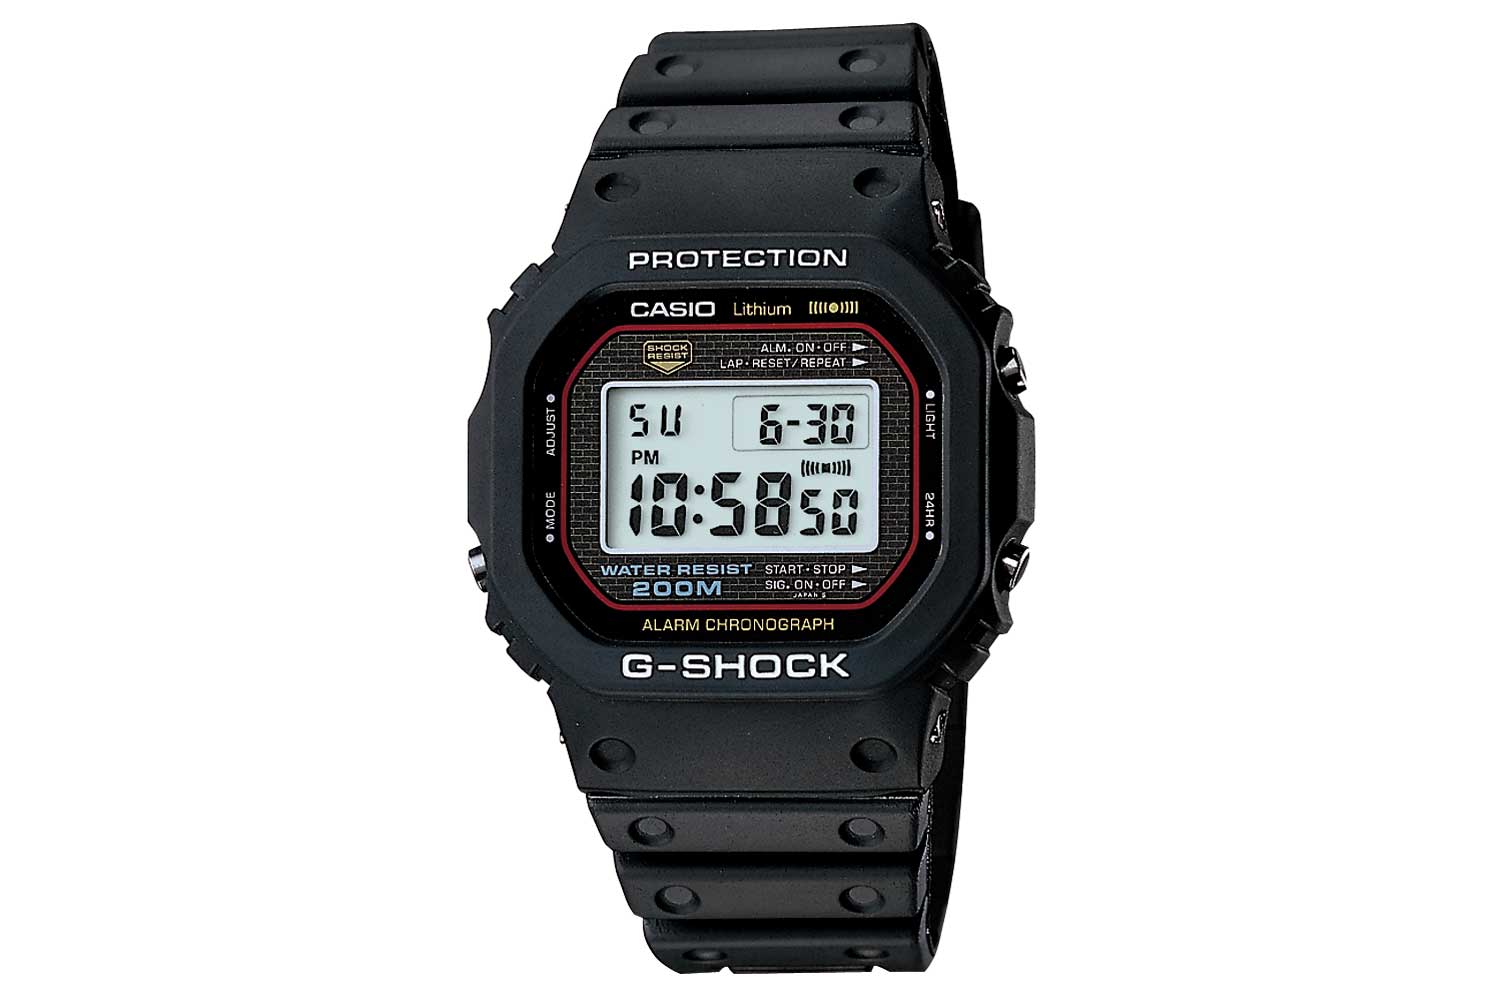 The DW-5000, the very first G-SHOCK from 1983, in black resin